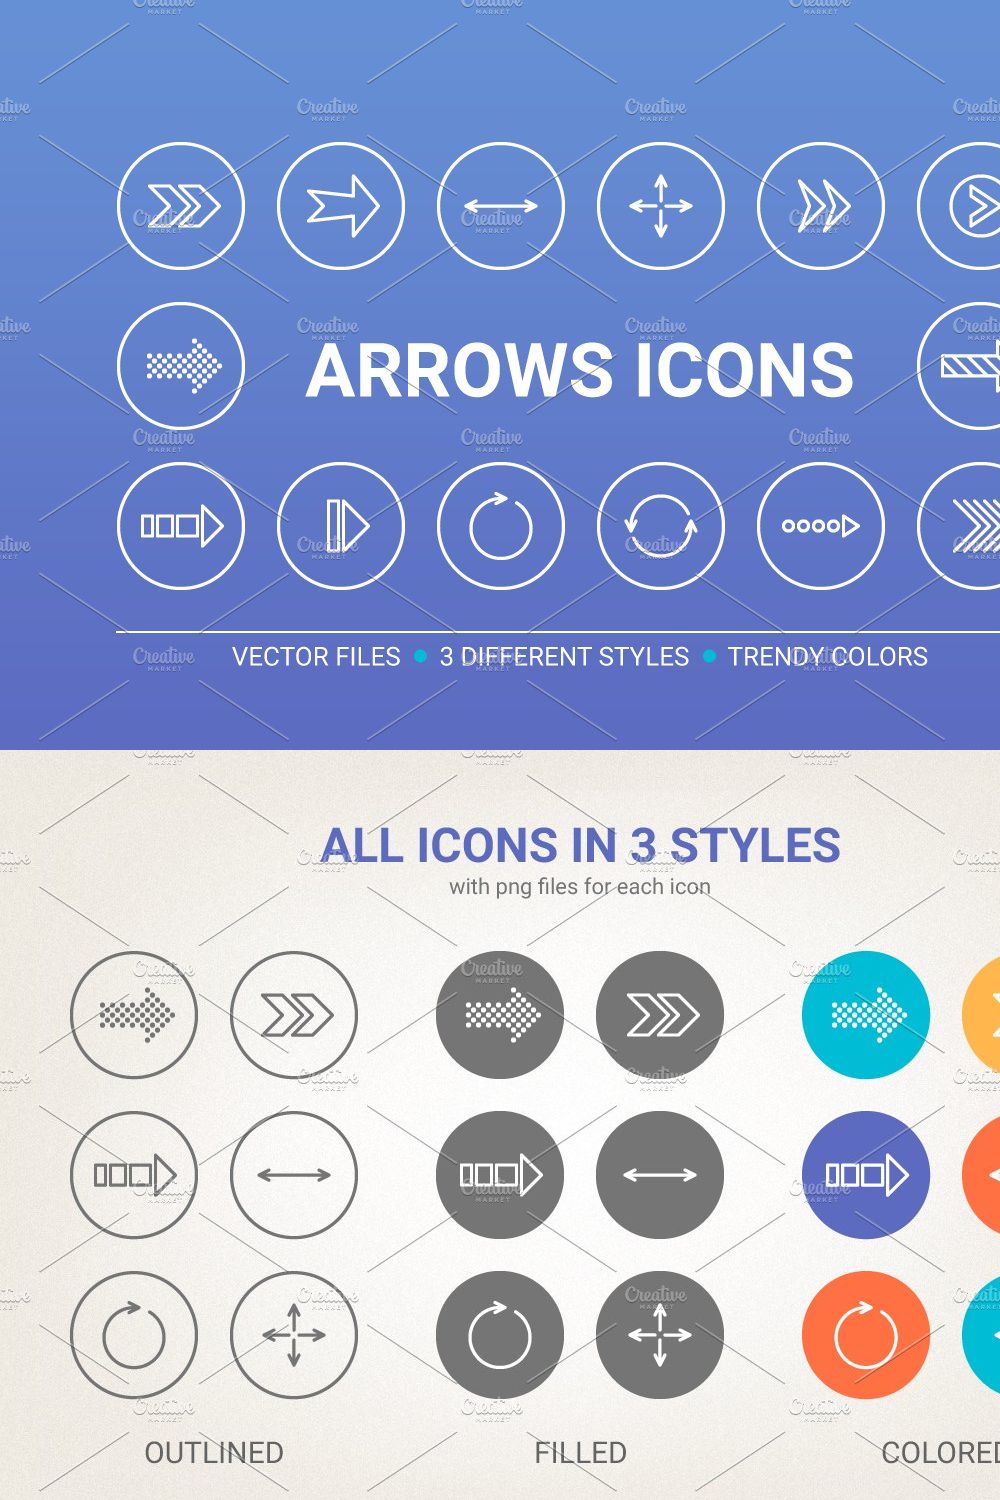 Circle arrows icons pinterest preview image.